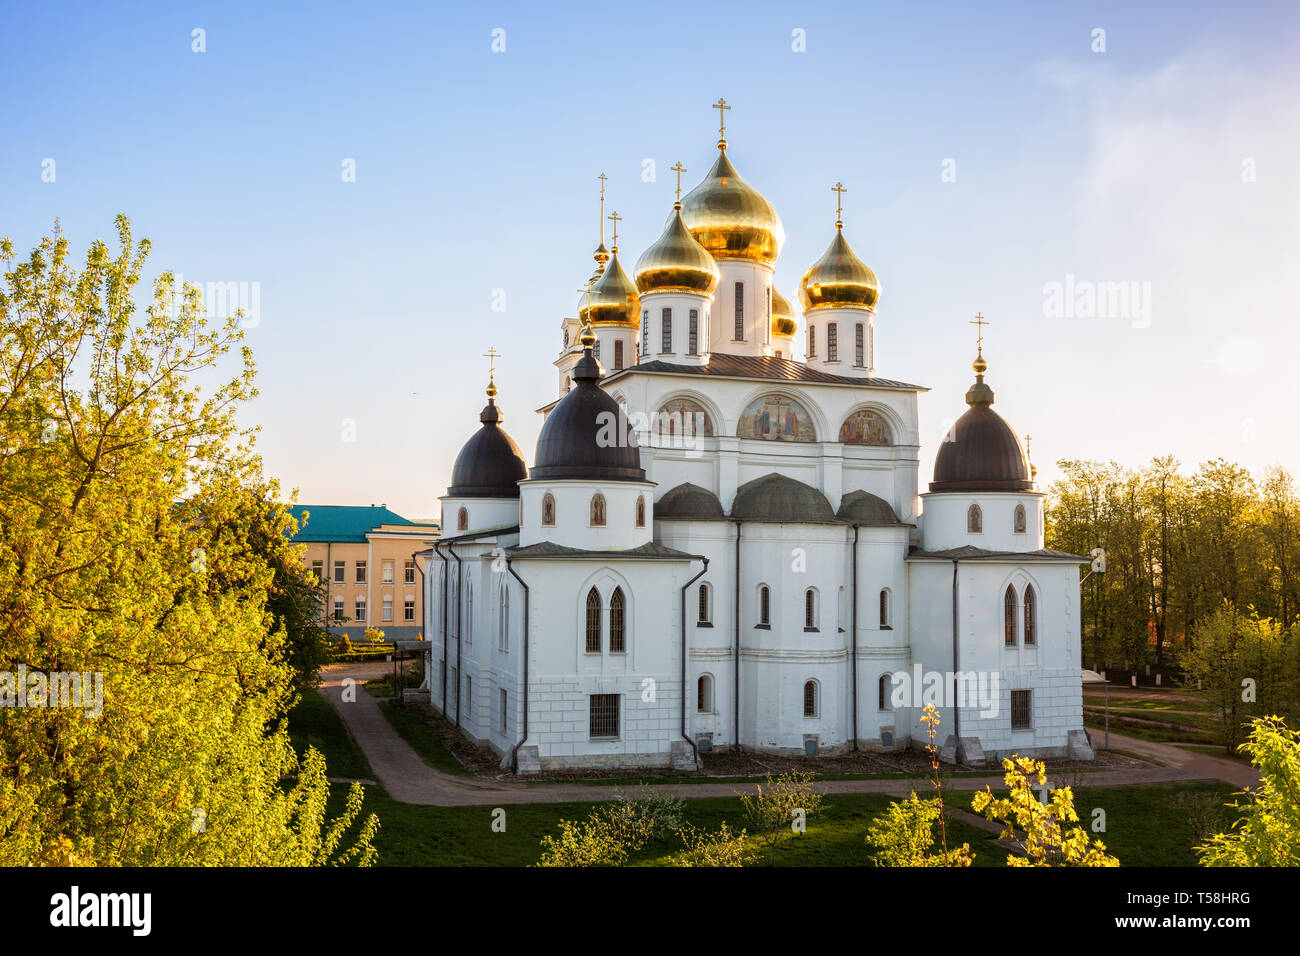 Ancient Assumption Cathedral (early 16th century) in the Dmitrov Kremlin, view from the Kremlin earthen wall. Dmitrov, Moscow region, Russia Stock Photo